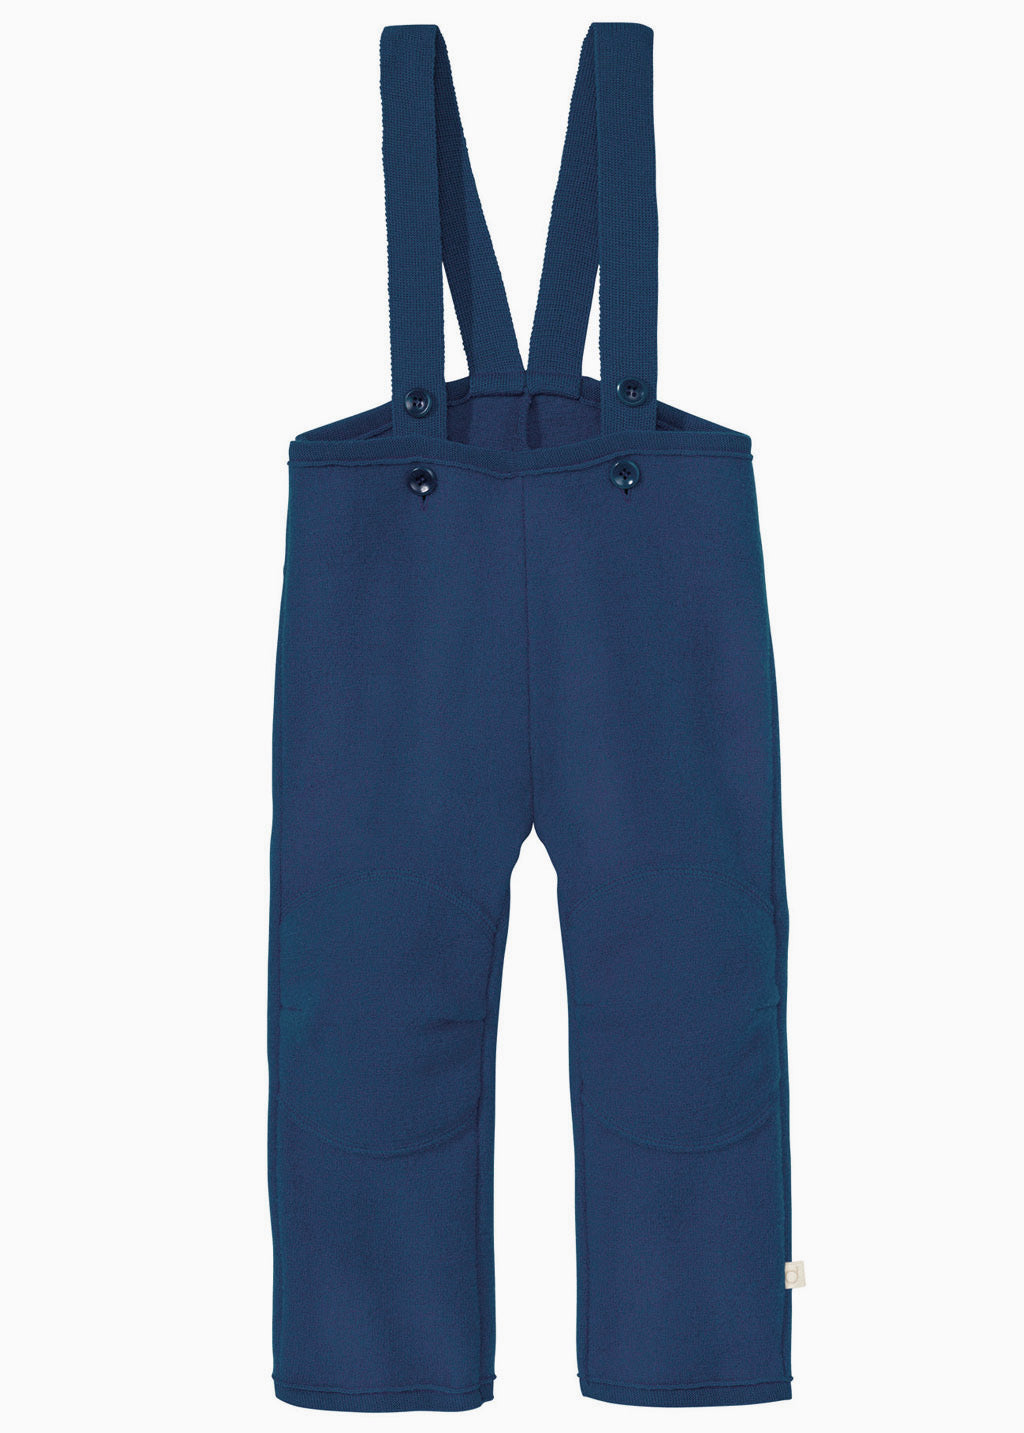 Disana boiled wool trousers in navy